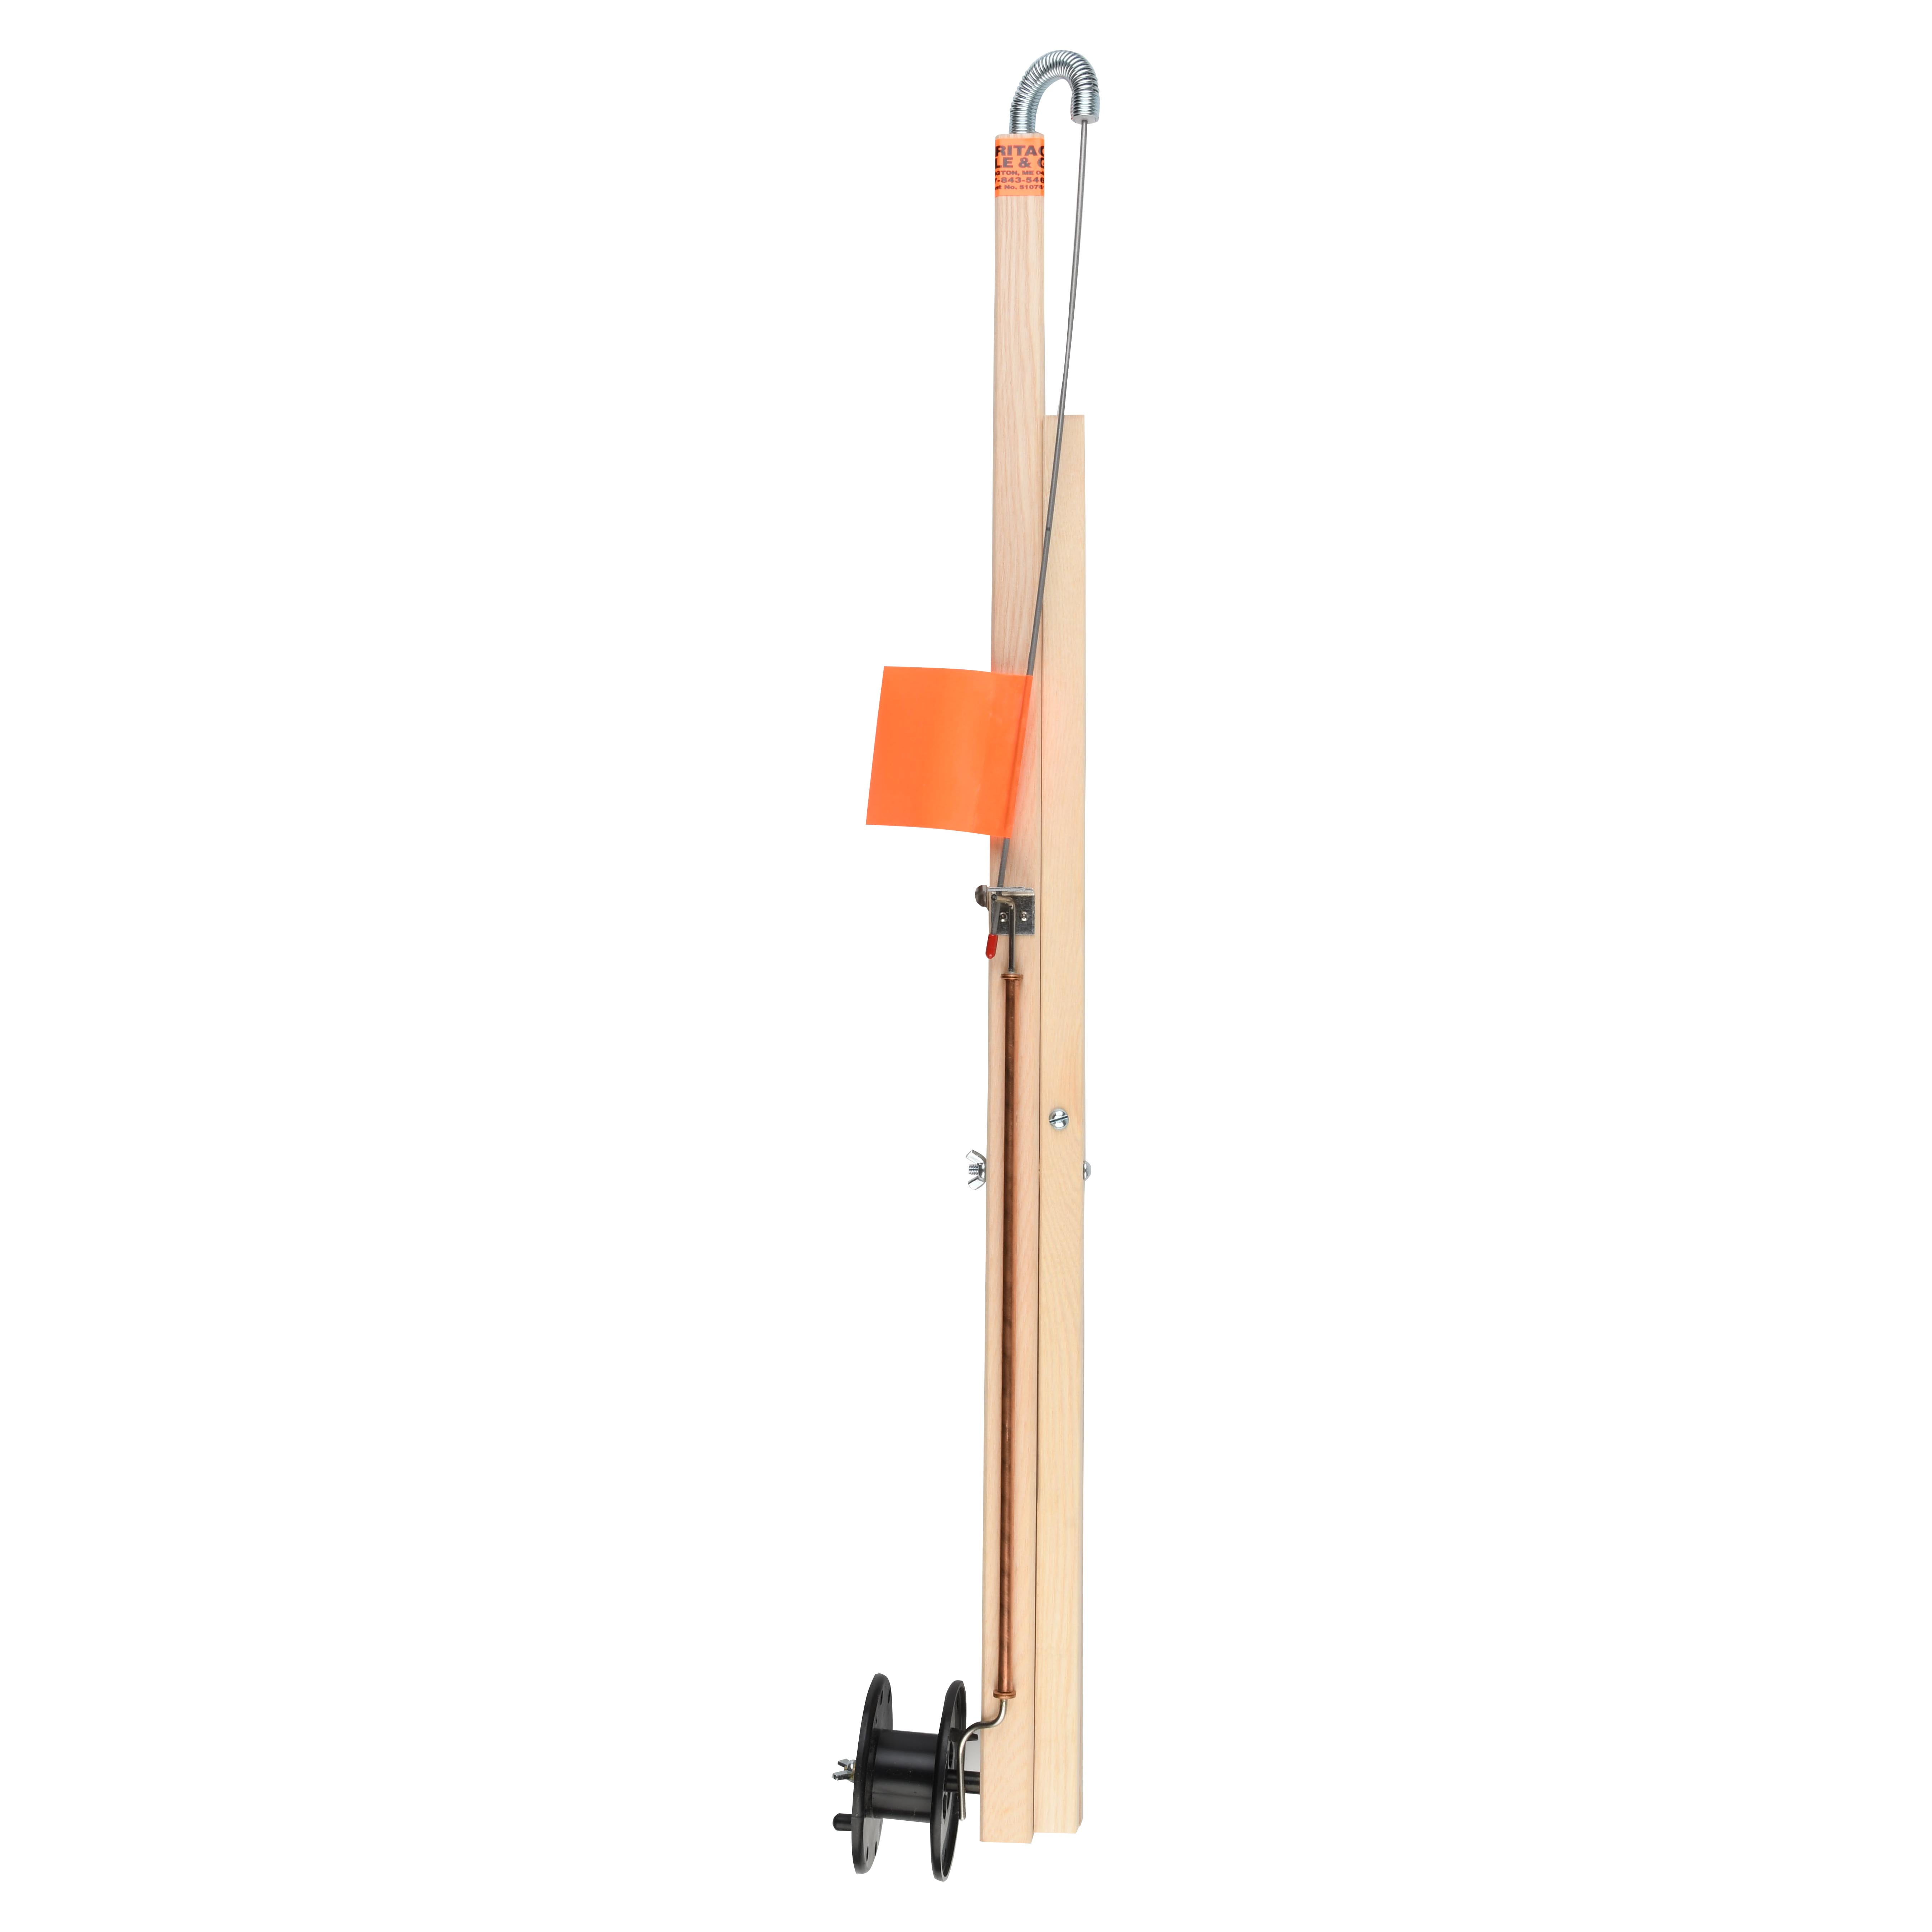 Heritage Tackle & Gear Laker Standard Wood Tip-up Ice Fishing